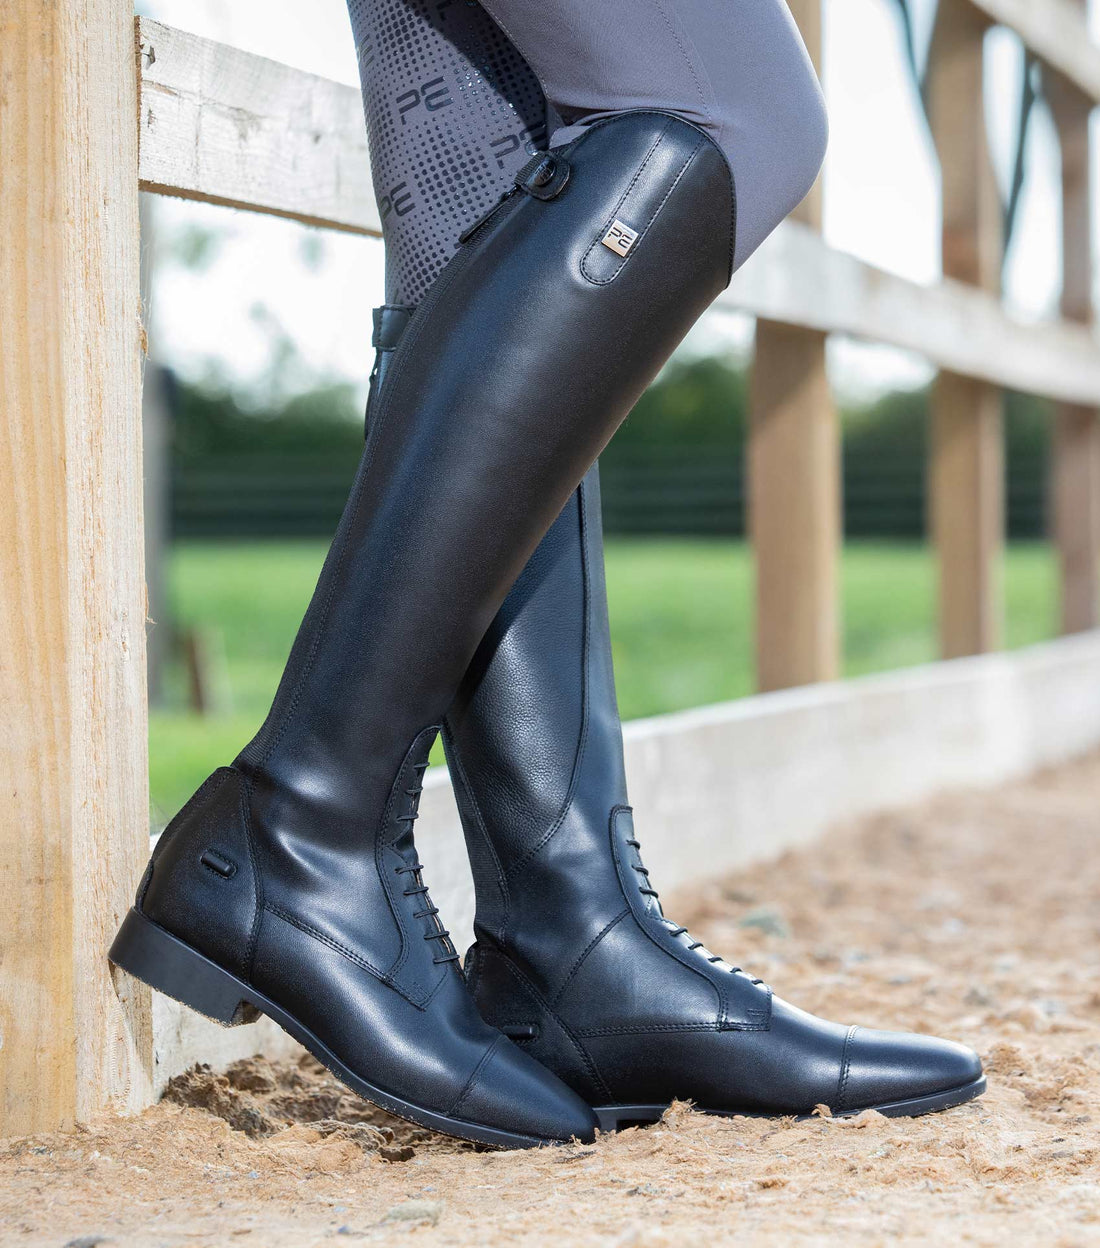 Premier Equine Anima Ladies Synthetic Field Tall Riding Boot